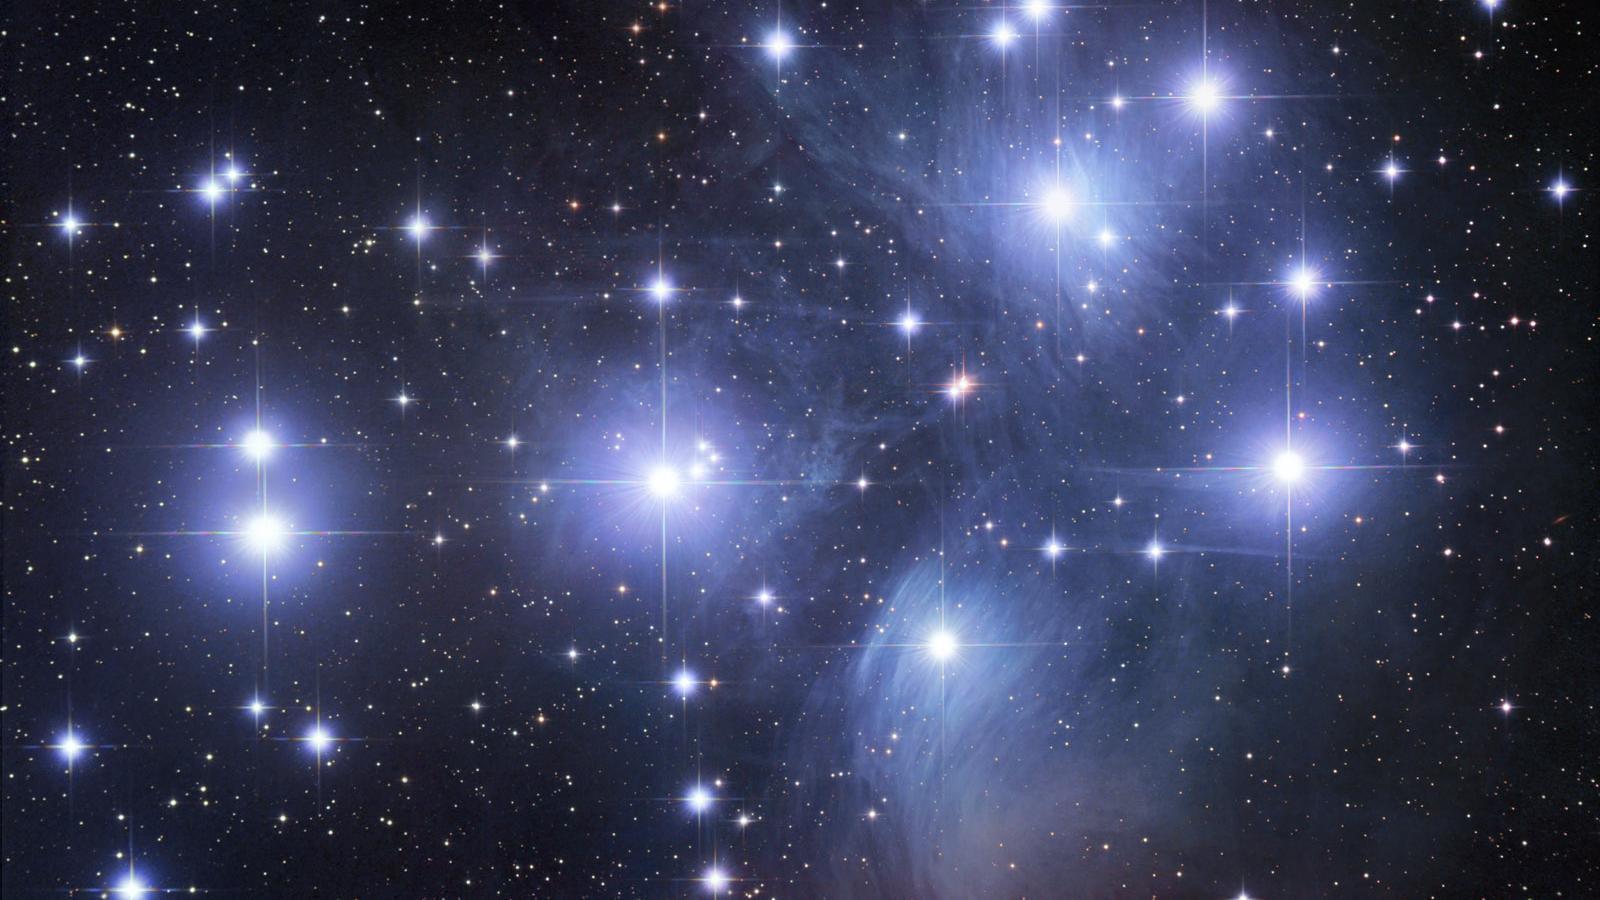 M45 The Pleiades Star Cluster